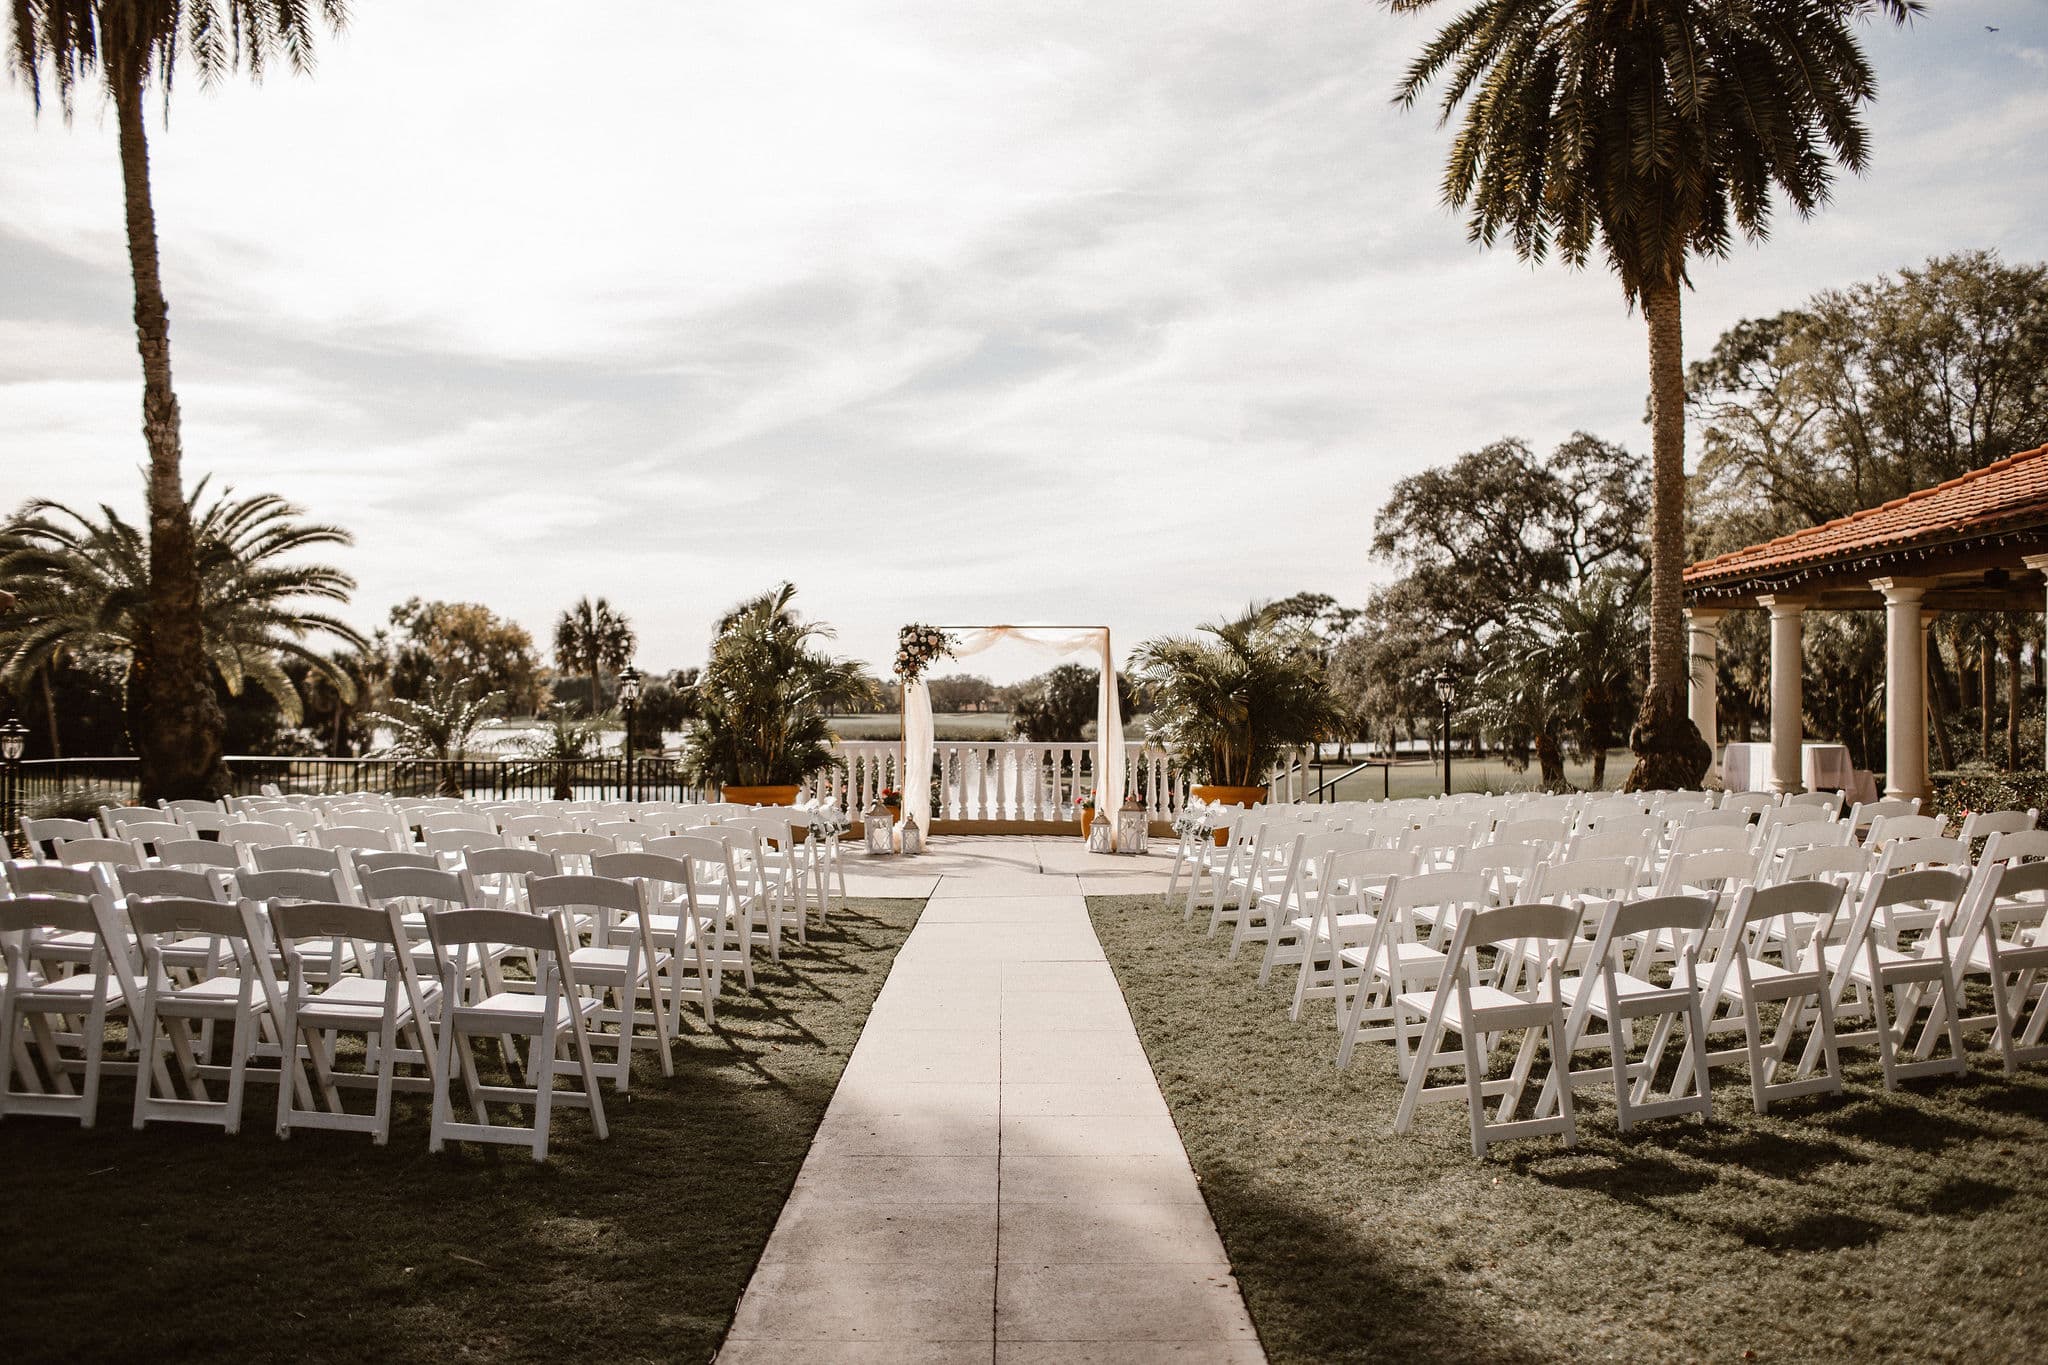 Wedding ceremony aisle at a Spanish style wedding venue in Florida